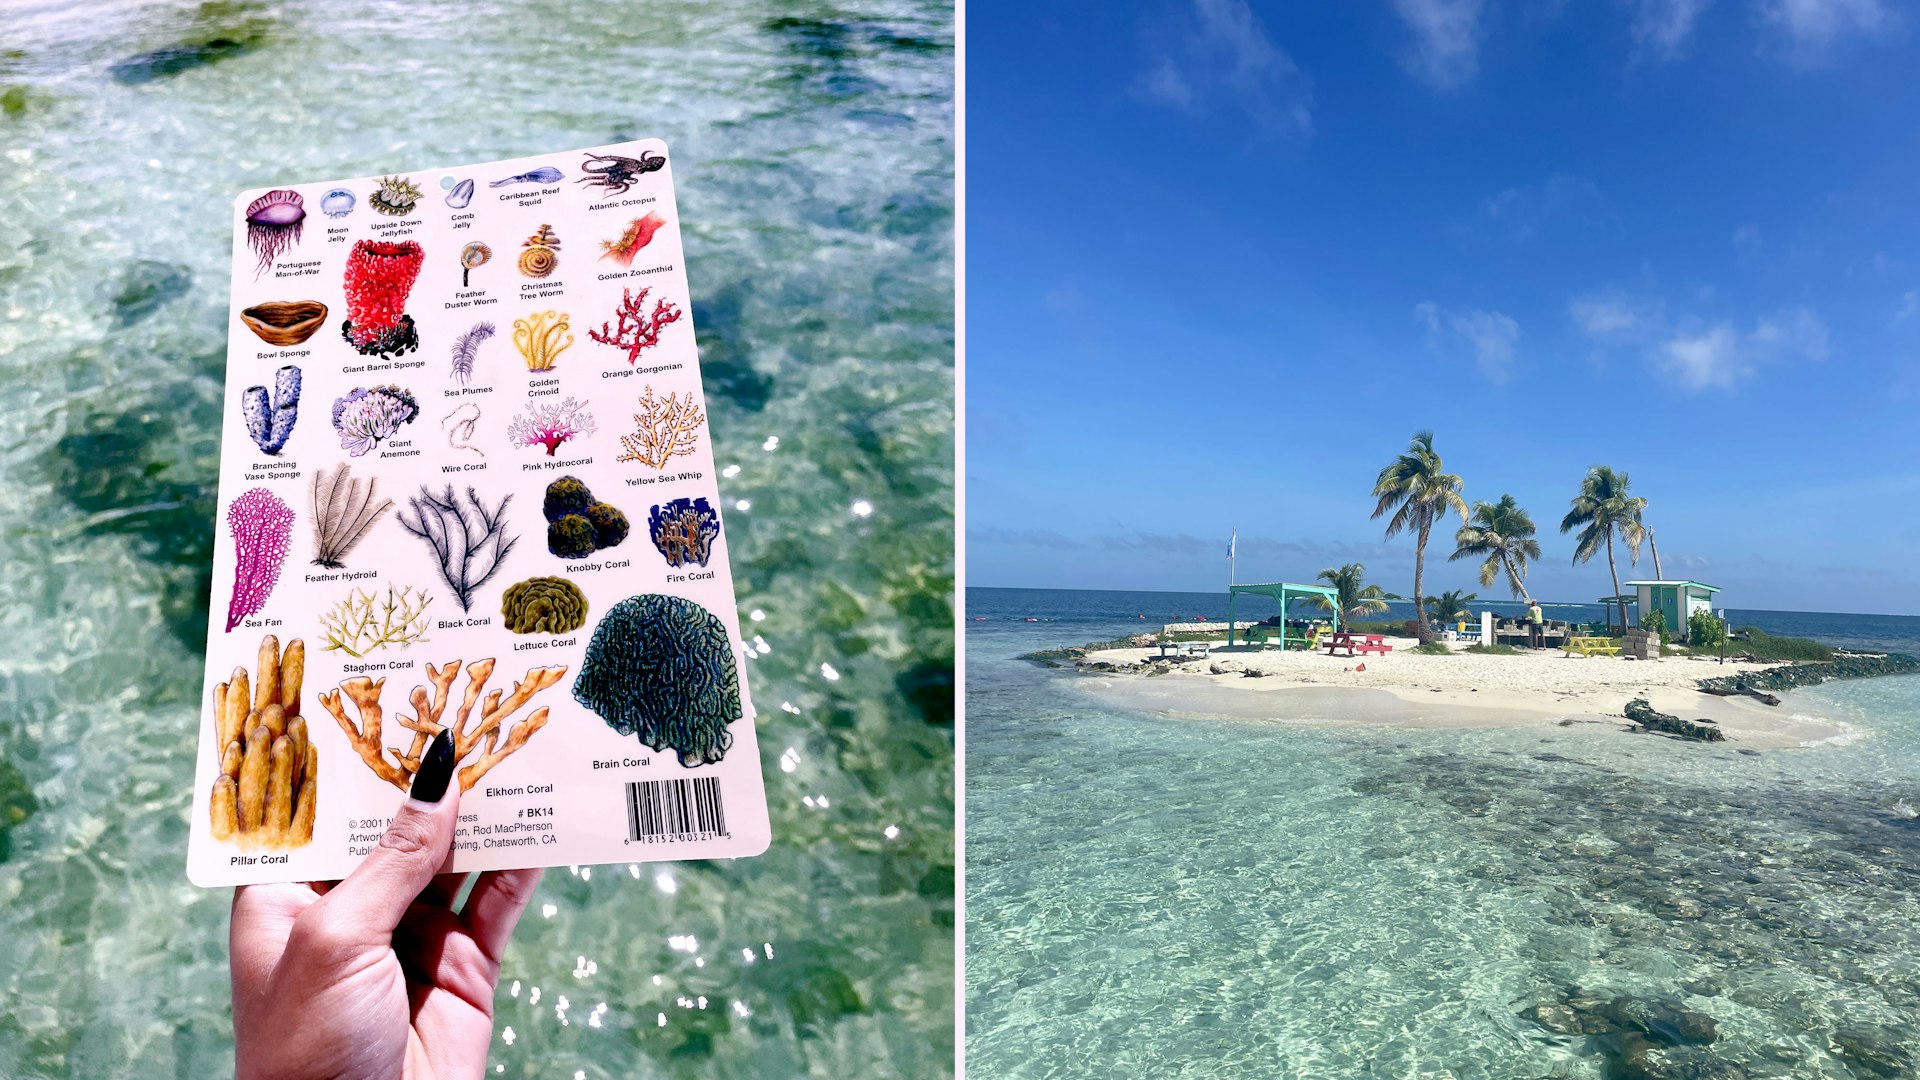 Left: A hand holds a coral chart with images and labels of different coral types; Right: a tiny sand island in the middle of the sea